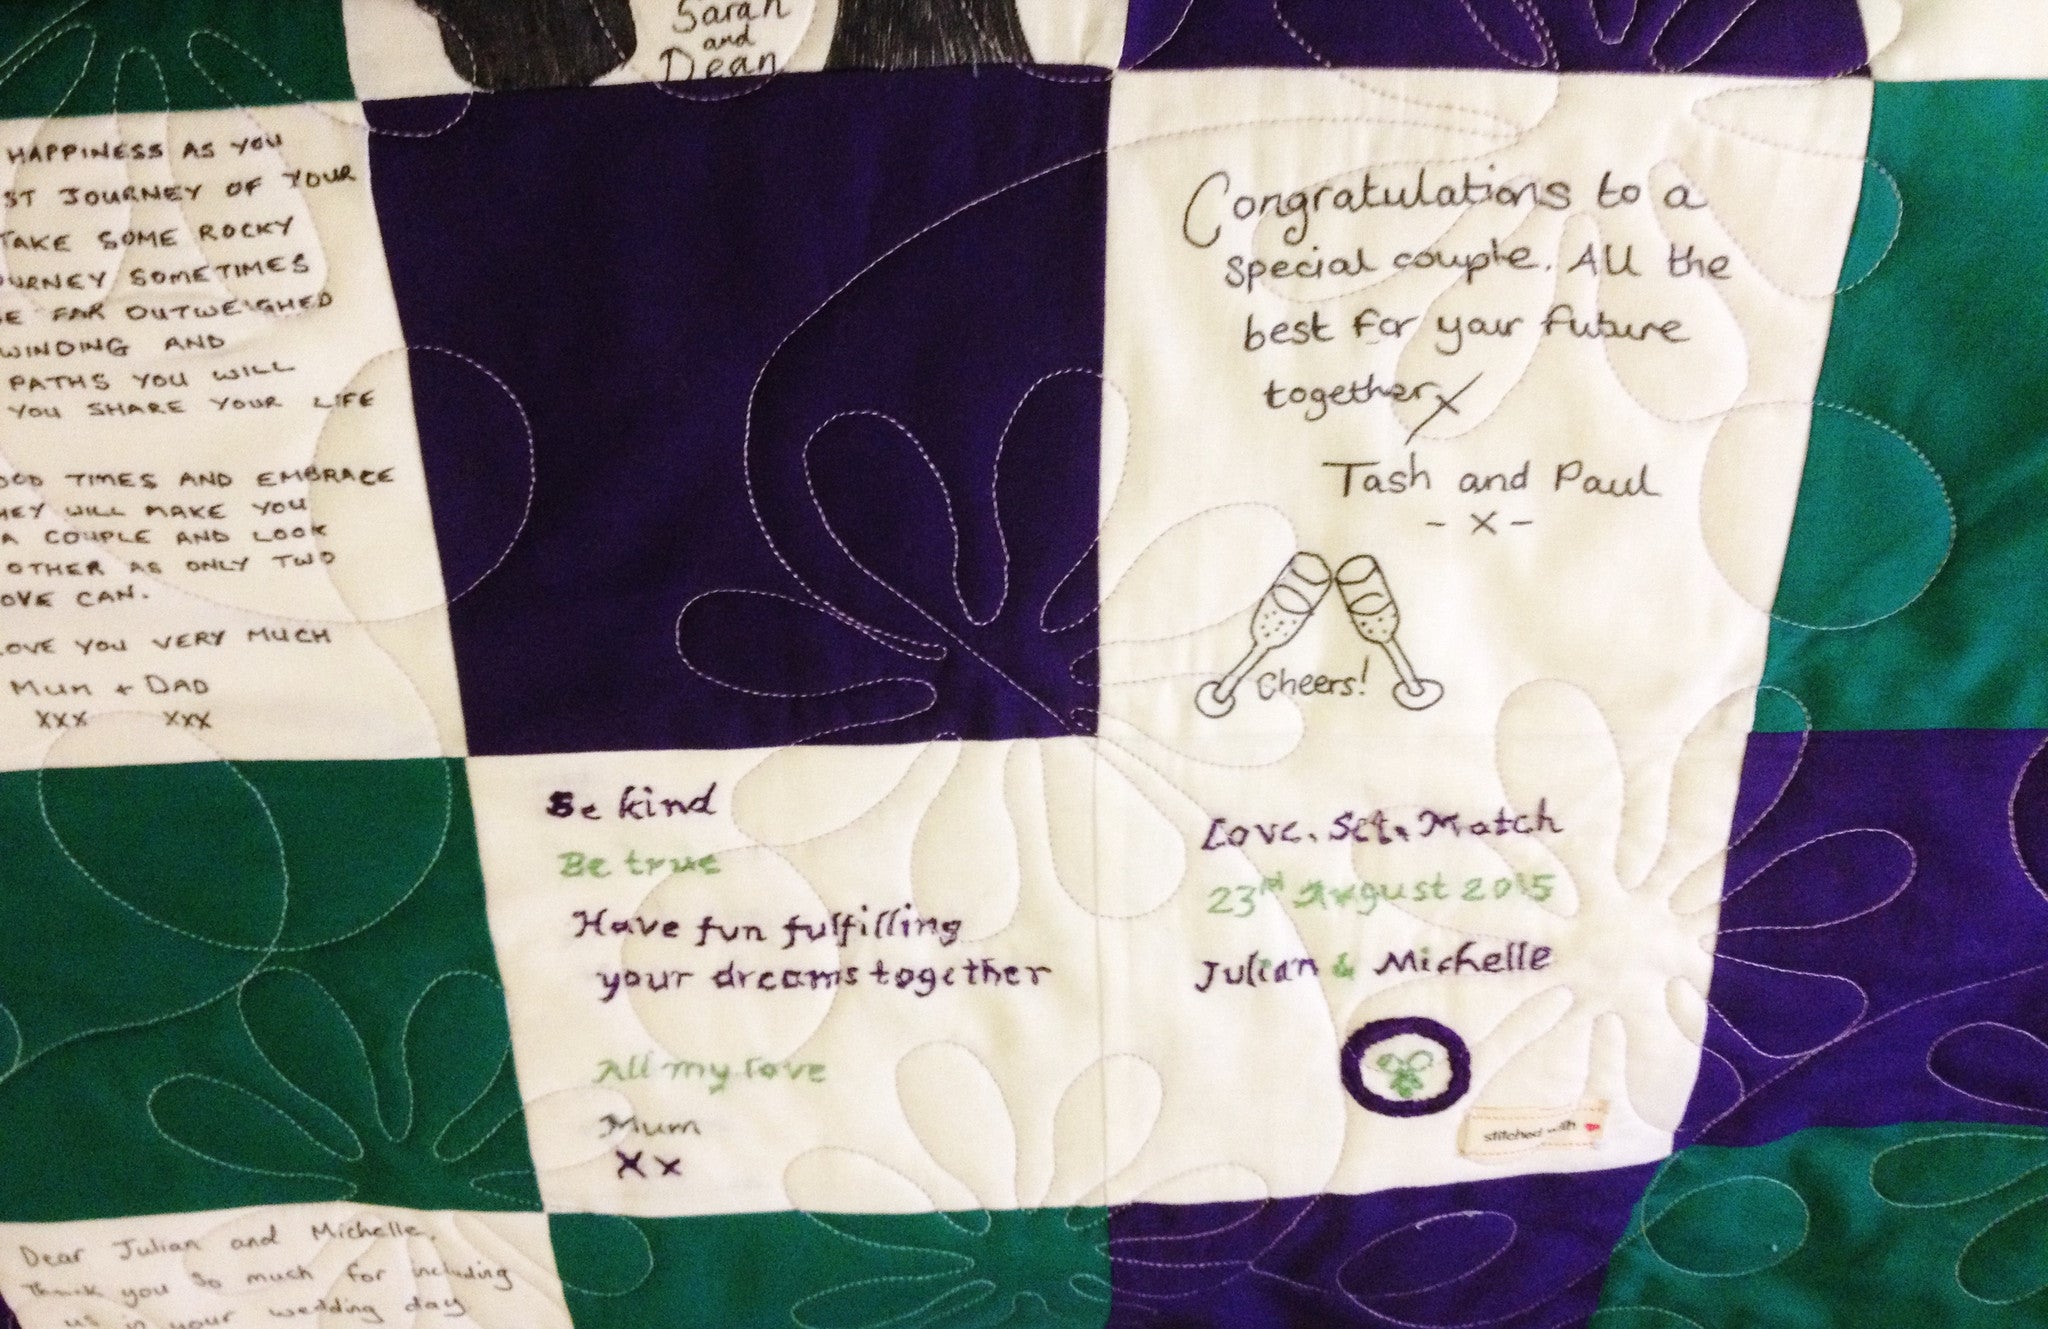 Wedding Guest Signature Quilt - A Beautiful Poem Written by- Janet Hindley